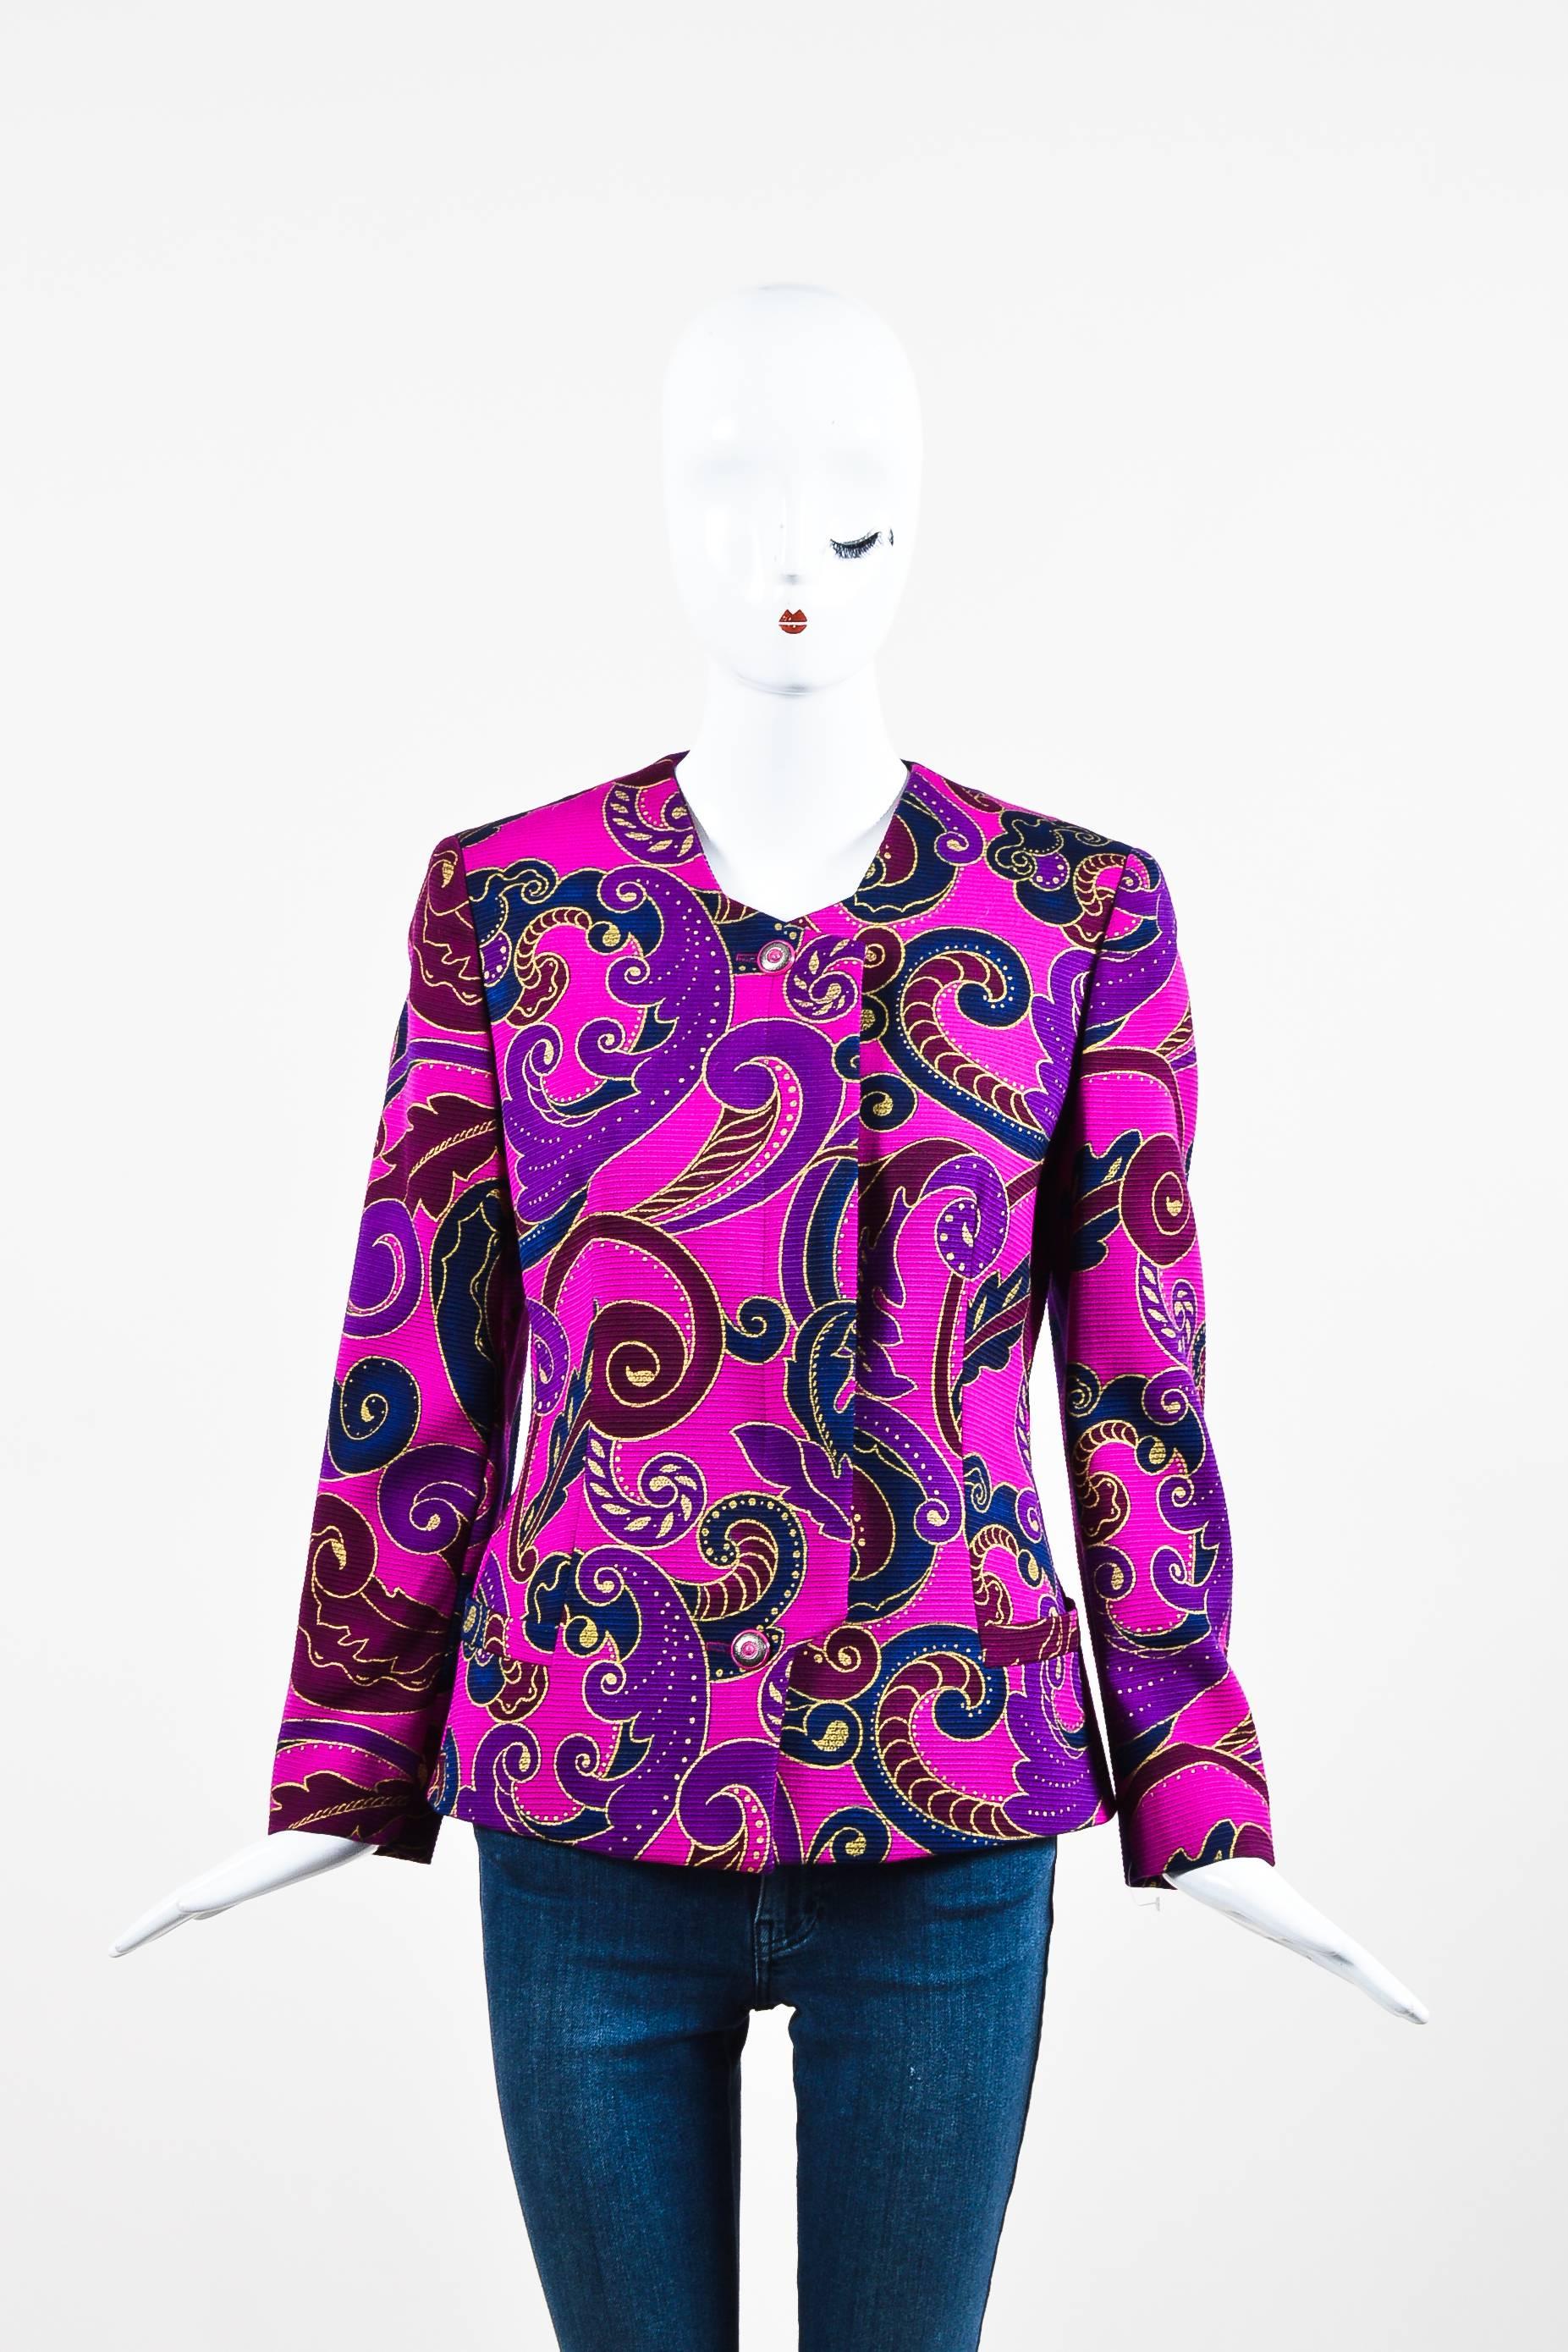 Fuchsia wool jacket is printed with swirl and paisley inspired designs .Long sleeves have lightly padded shoulders .Lightly textured material .Hidden button closure down front .Pockets on front are basted closed .Lined throughout.

Additional